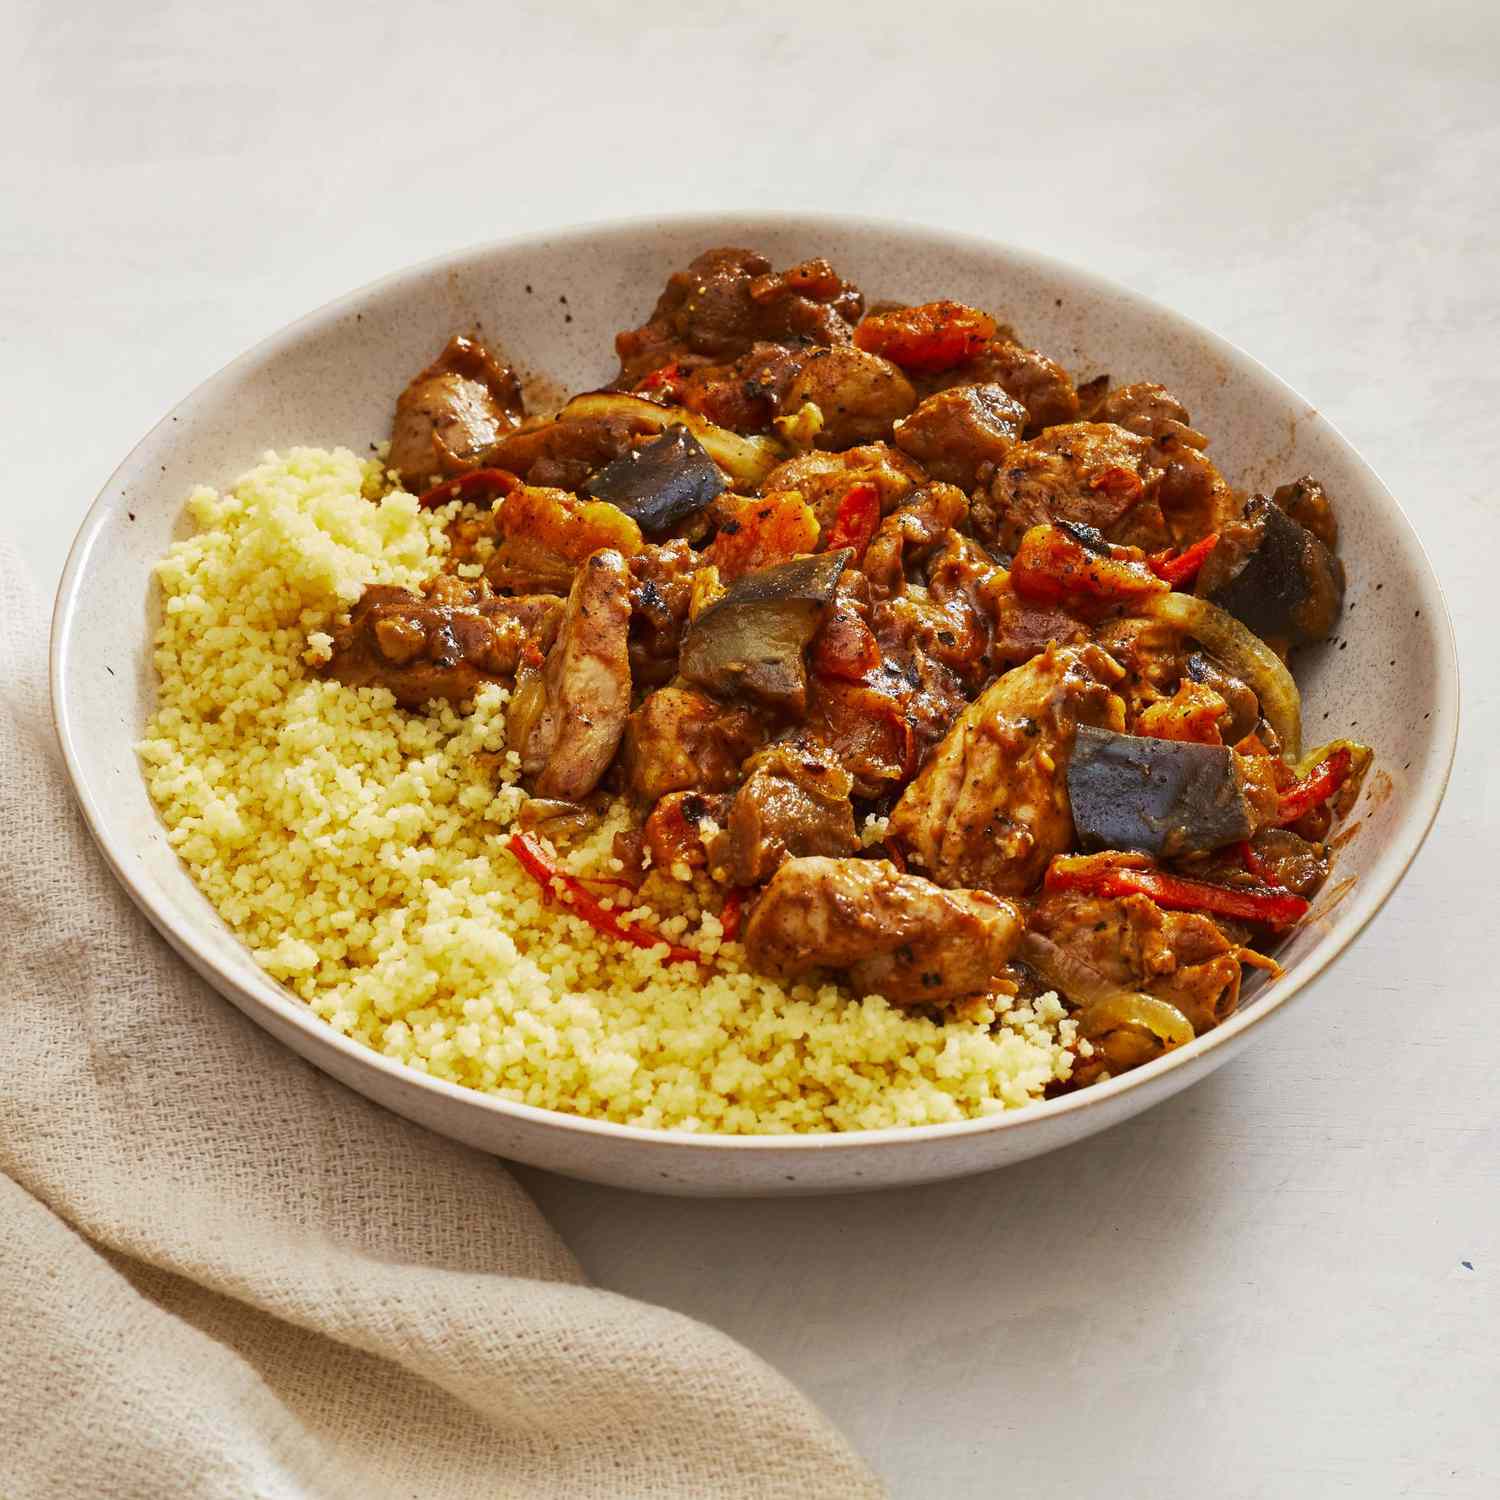 A shallow bowl of chicken tagine with couscous.